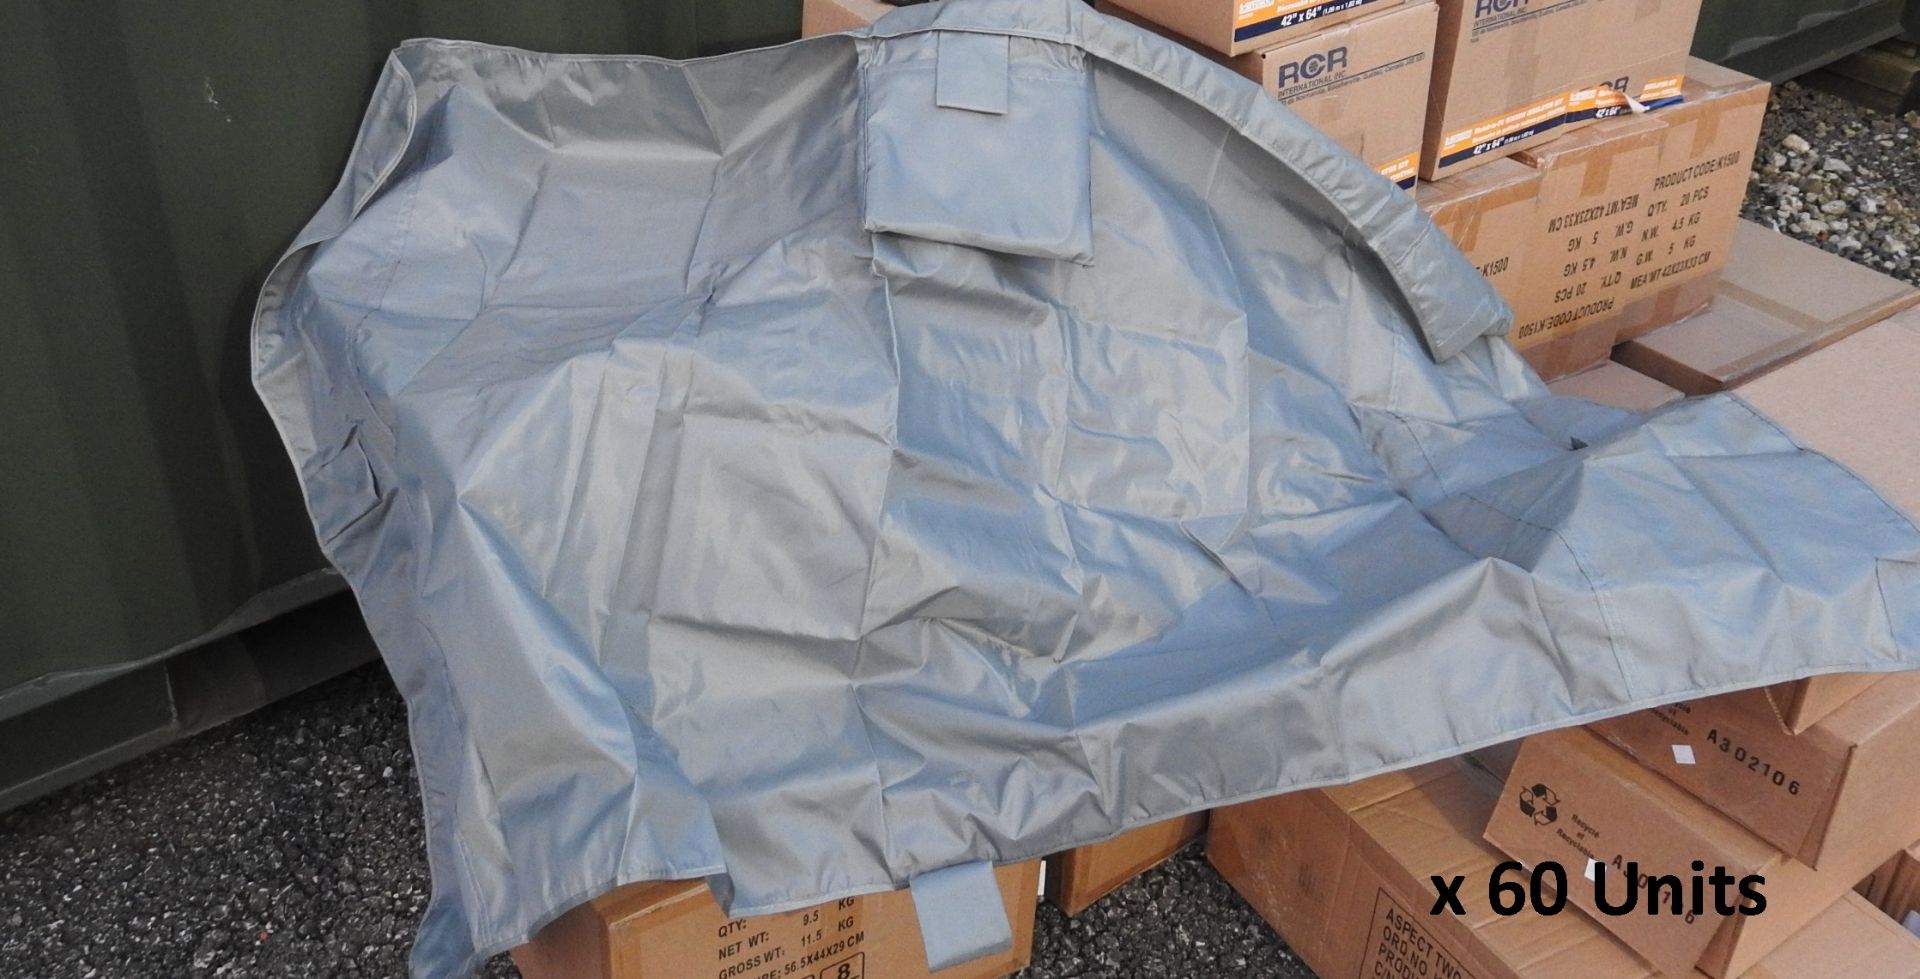 Magnetic Wind Screen Covers Job lot (x60) - Image 6 of 6